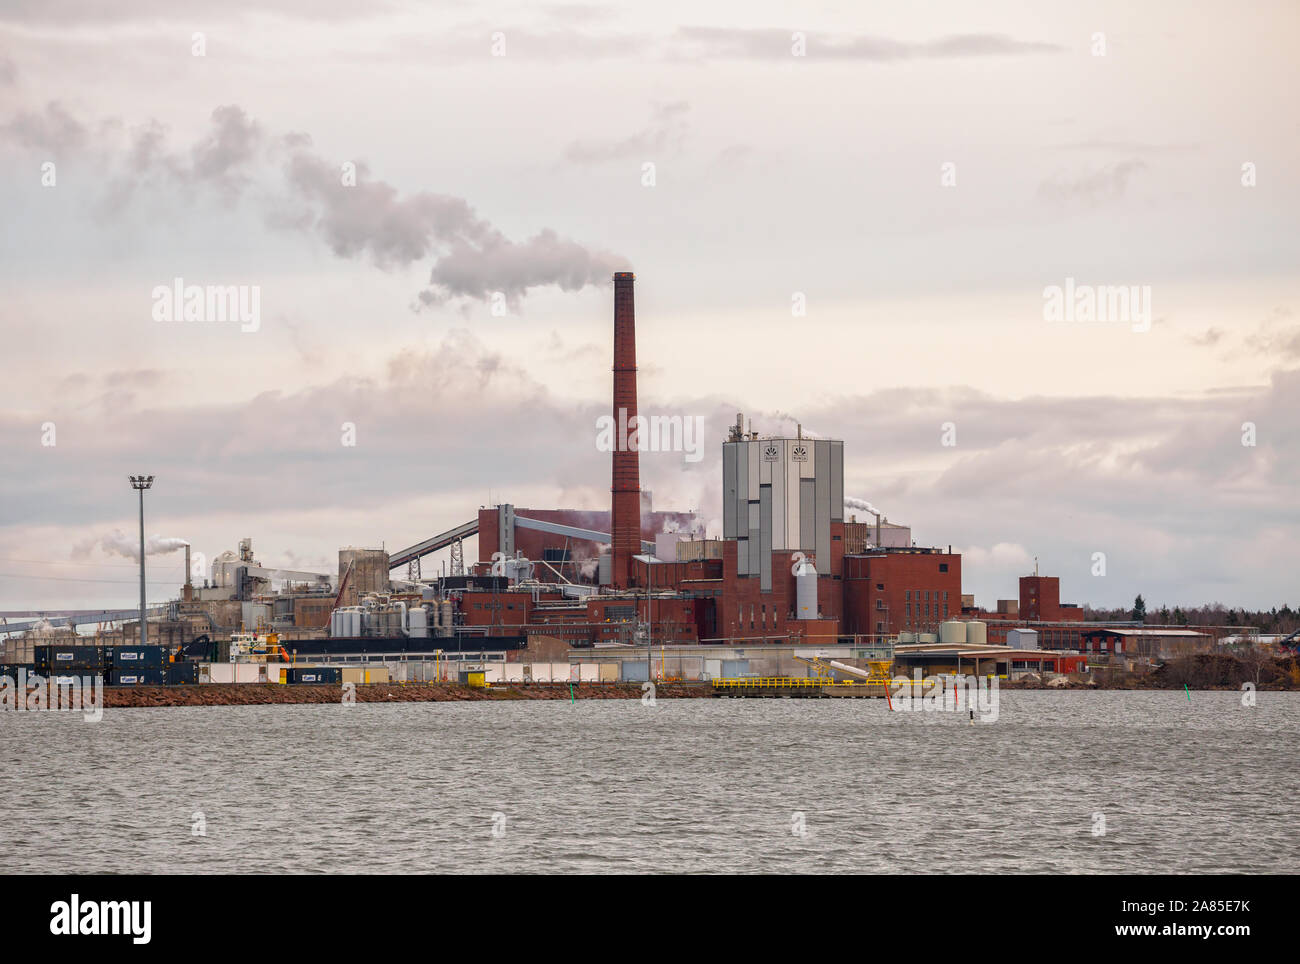 KOTKA, FINLAND - NOVEMBER 02, 2019: Sunila pulp and paper mill of Stora Enso Oyj corporation on shore of Gulf of Finland. Red brick industrial buildin Stock Photo